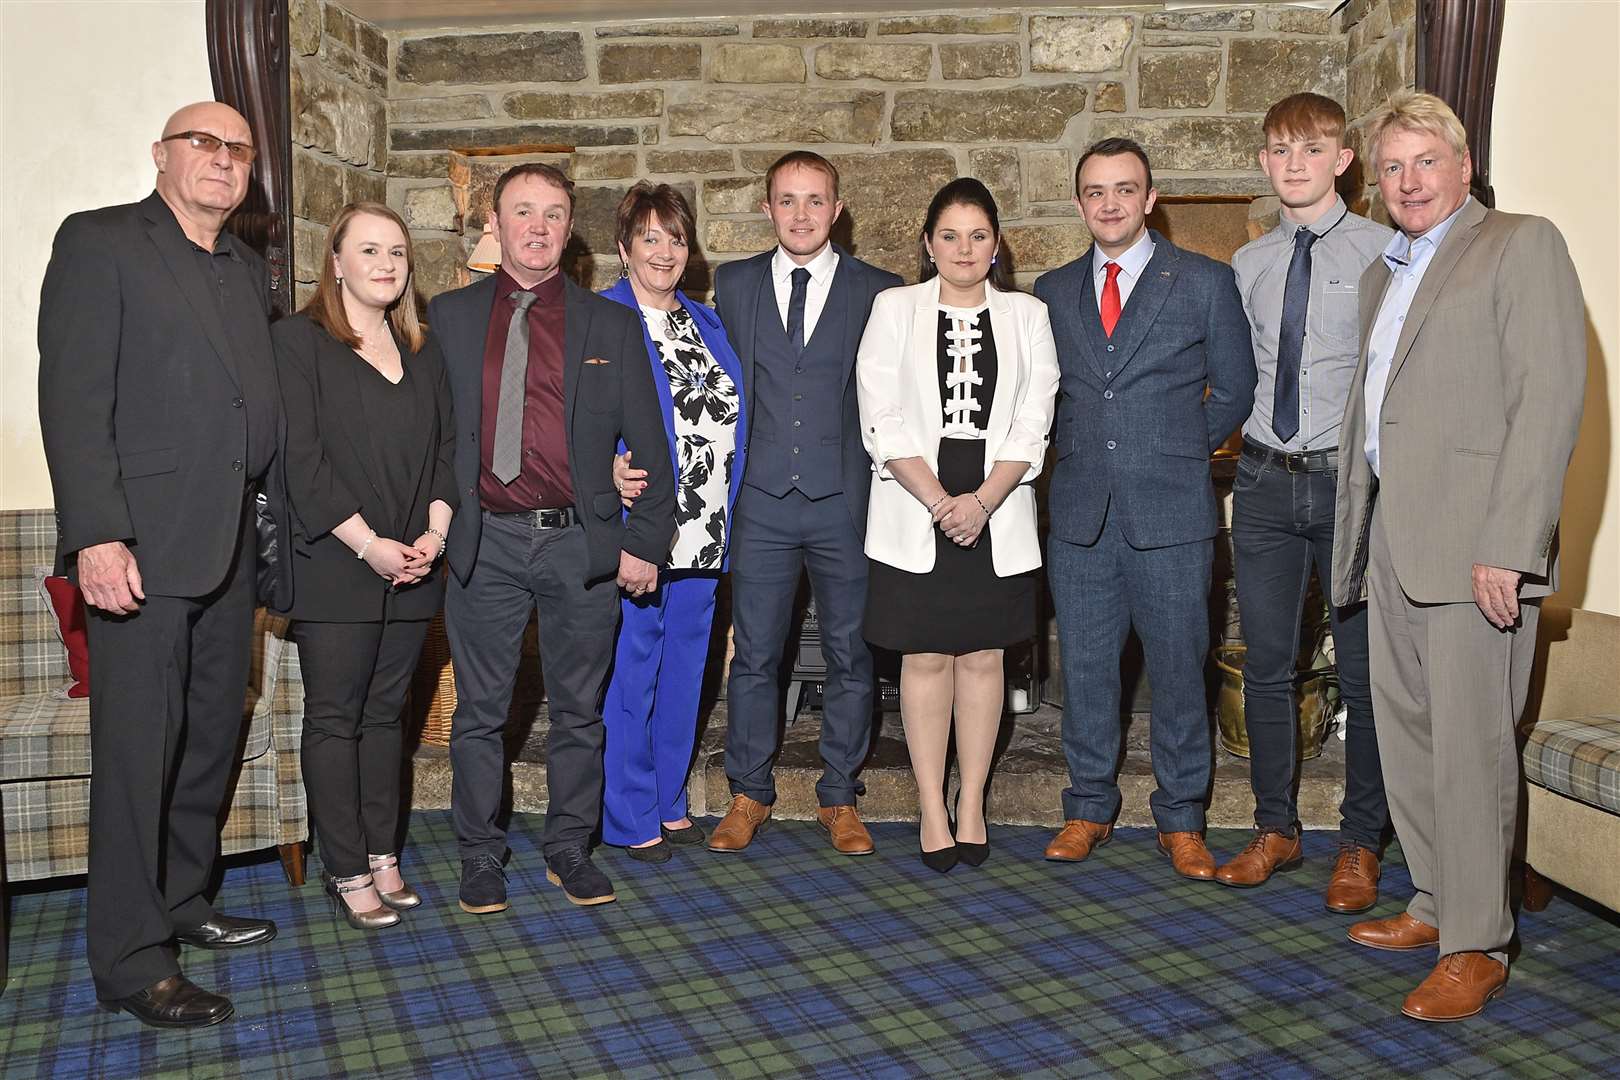 Richard and family members along with guests Frank McAvennie (right) and Frank Robb (left) at the testimonial dinner in the Norseman Hotel last month. Picture: Bob Roger